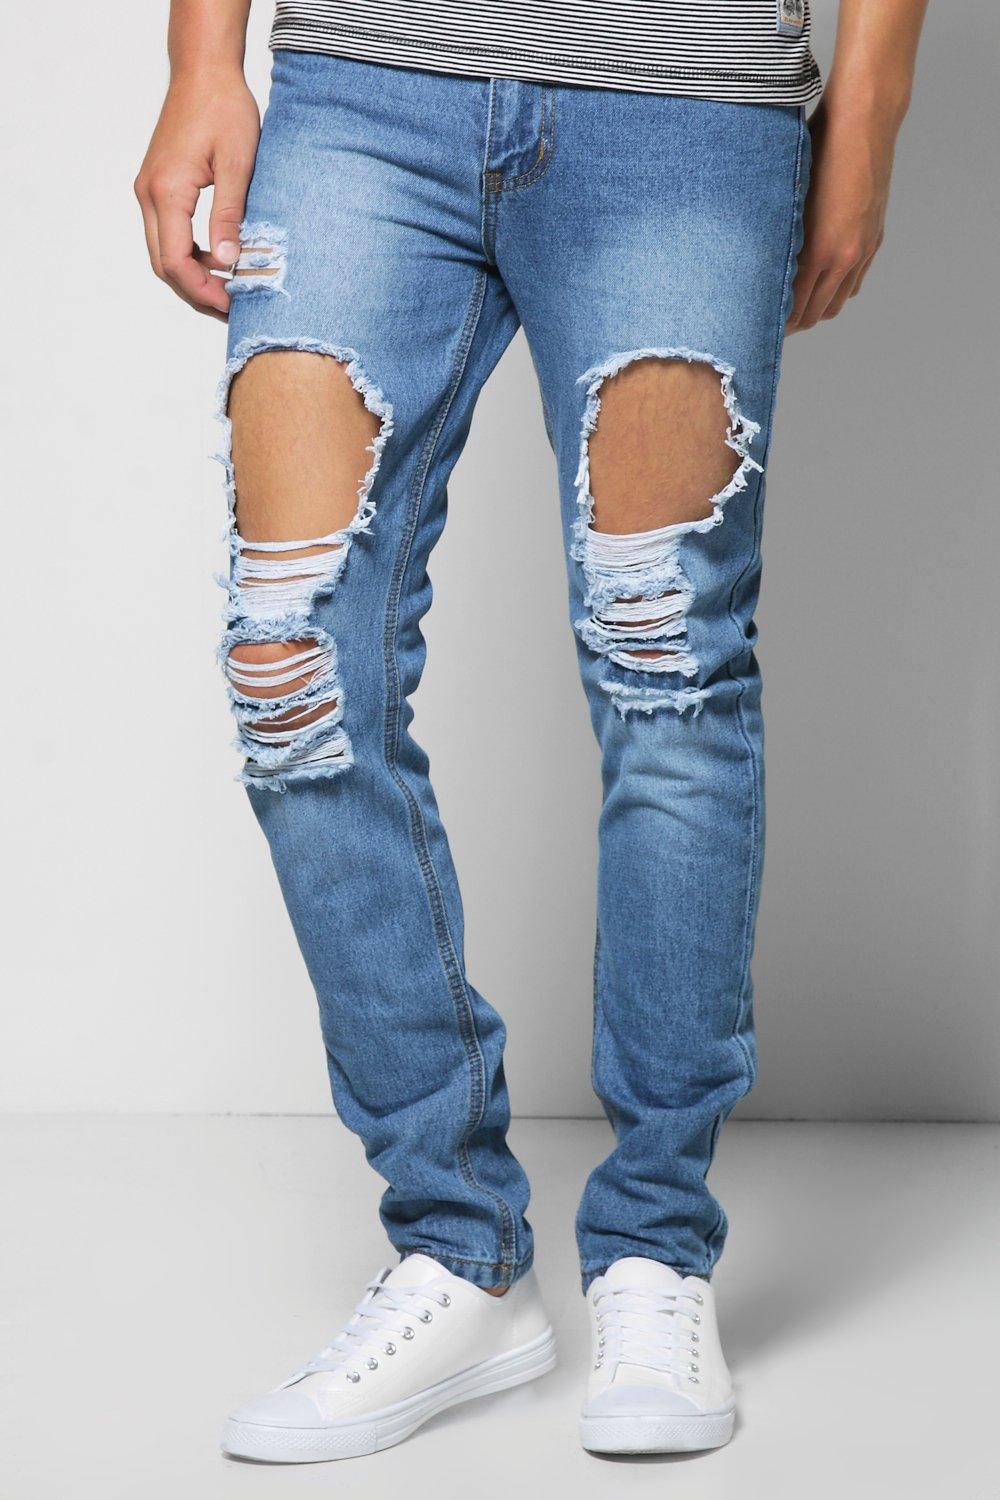 ripped jeans canada